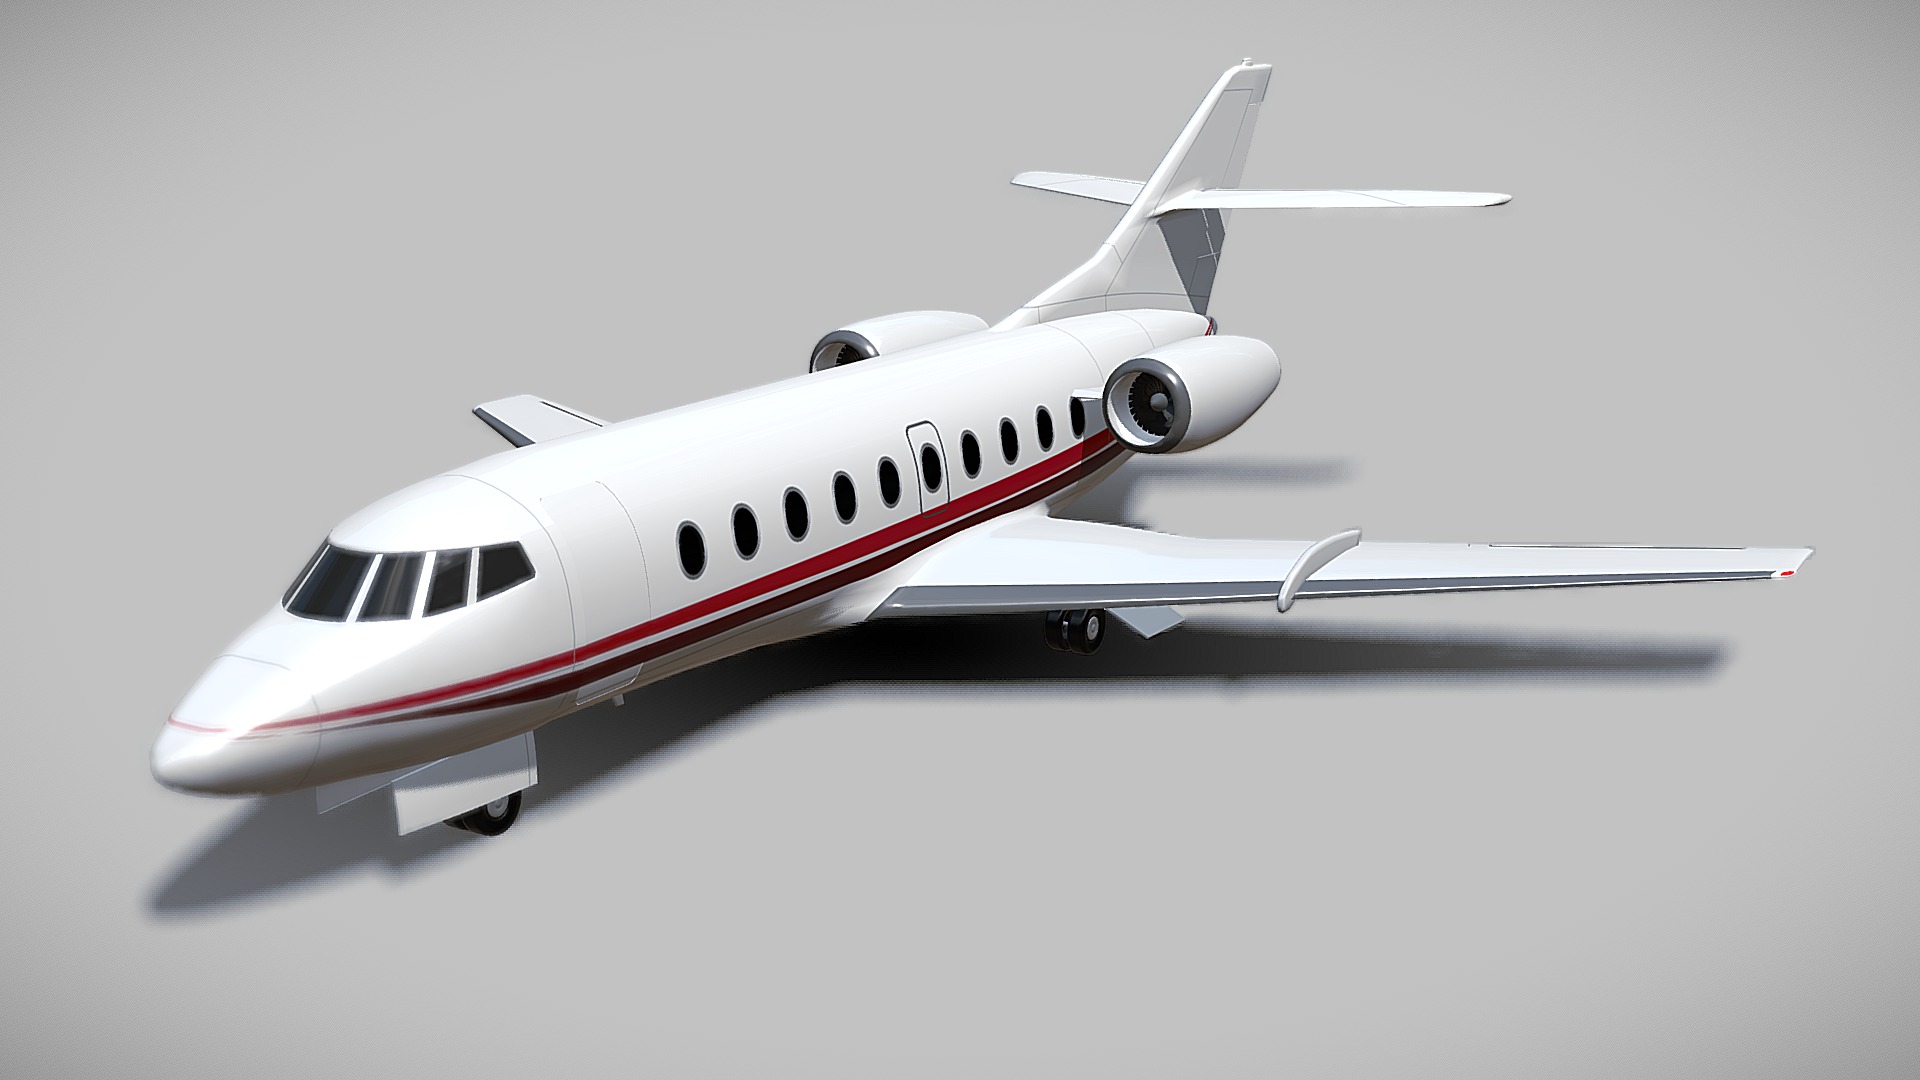 3D model Dassault Falcon 30 private jet - This is a 3D model of the Dassault Falcon 30 private jet. The 3D model is about a white and red airplane.